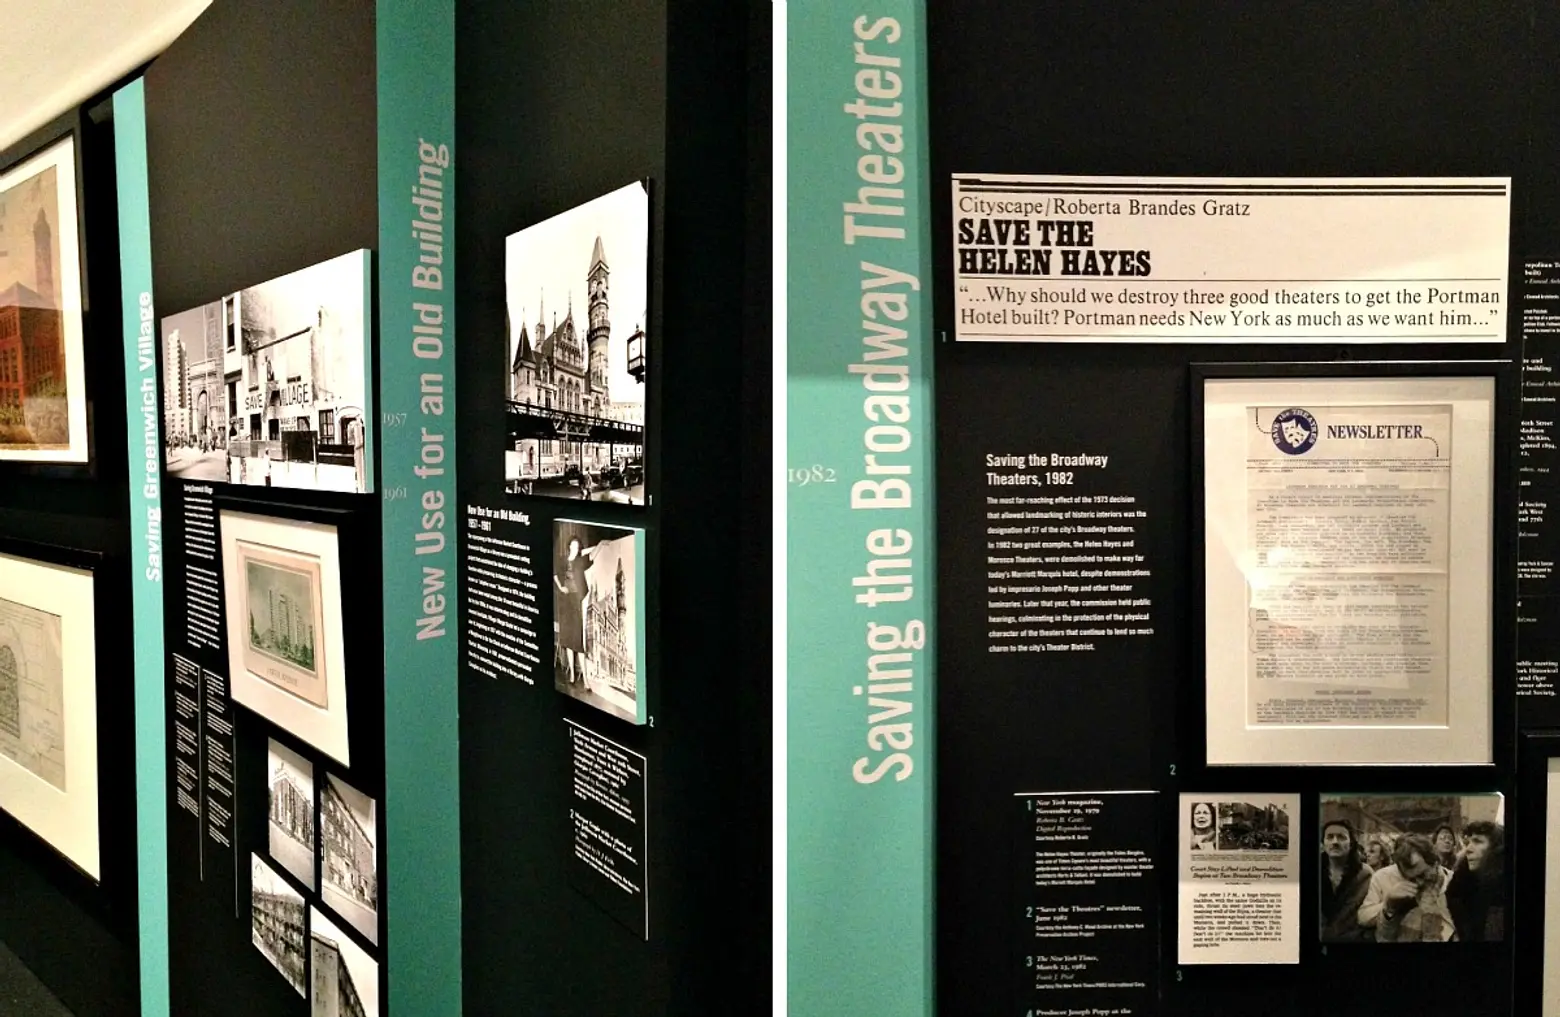 Museum of the City of New York, Saving Place exhibit, NYC landmarks law